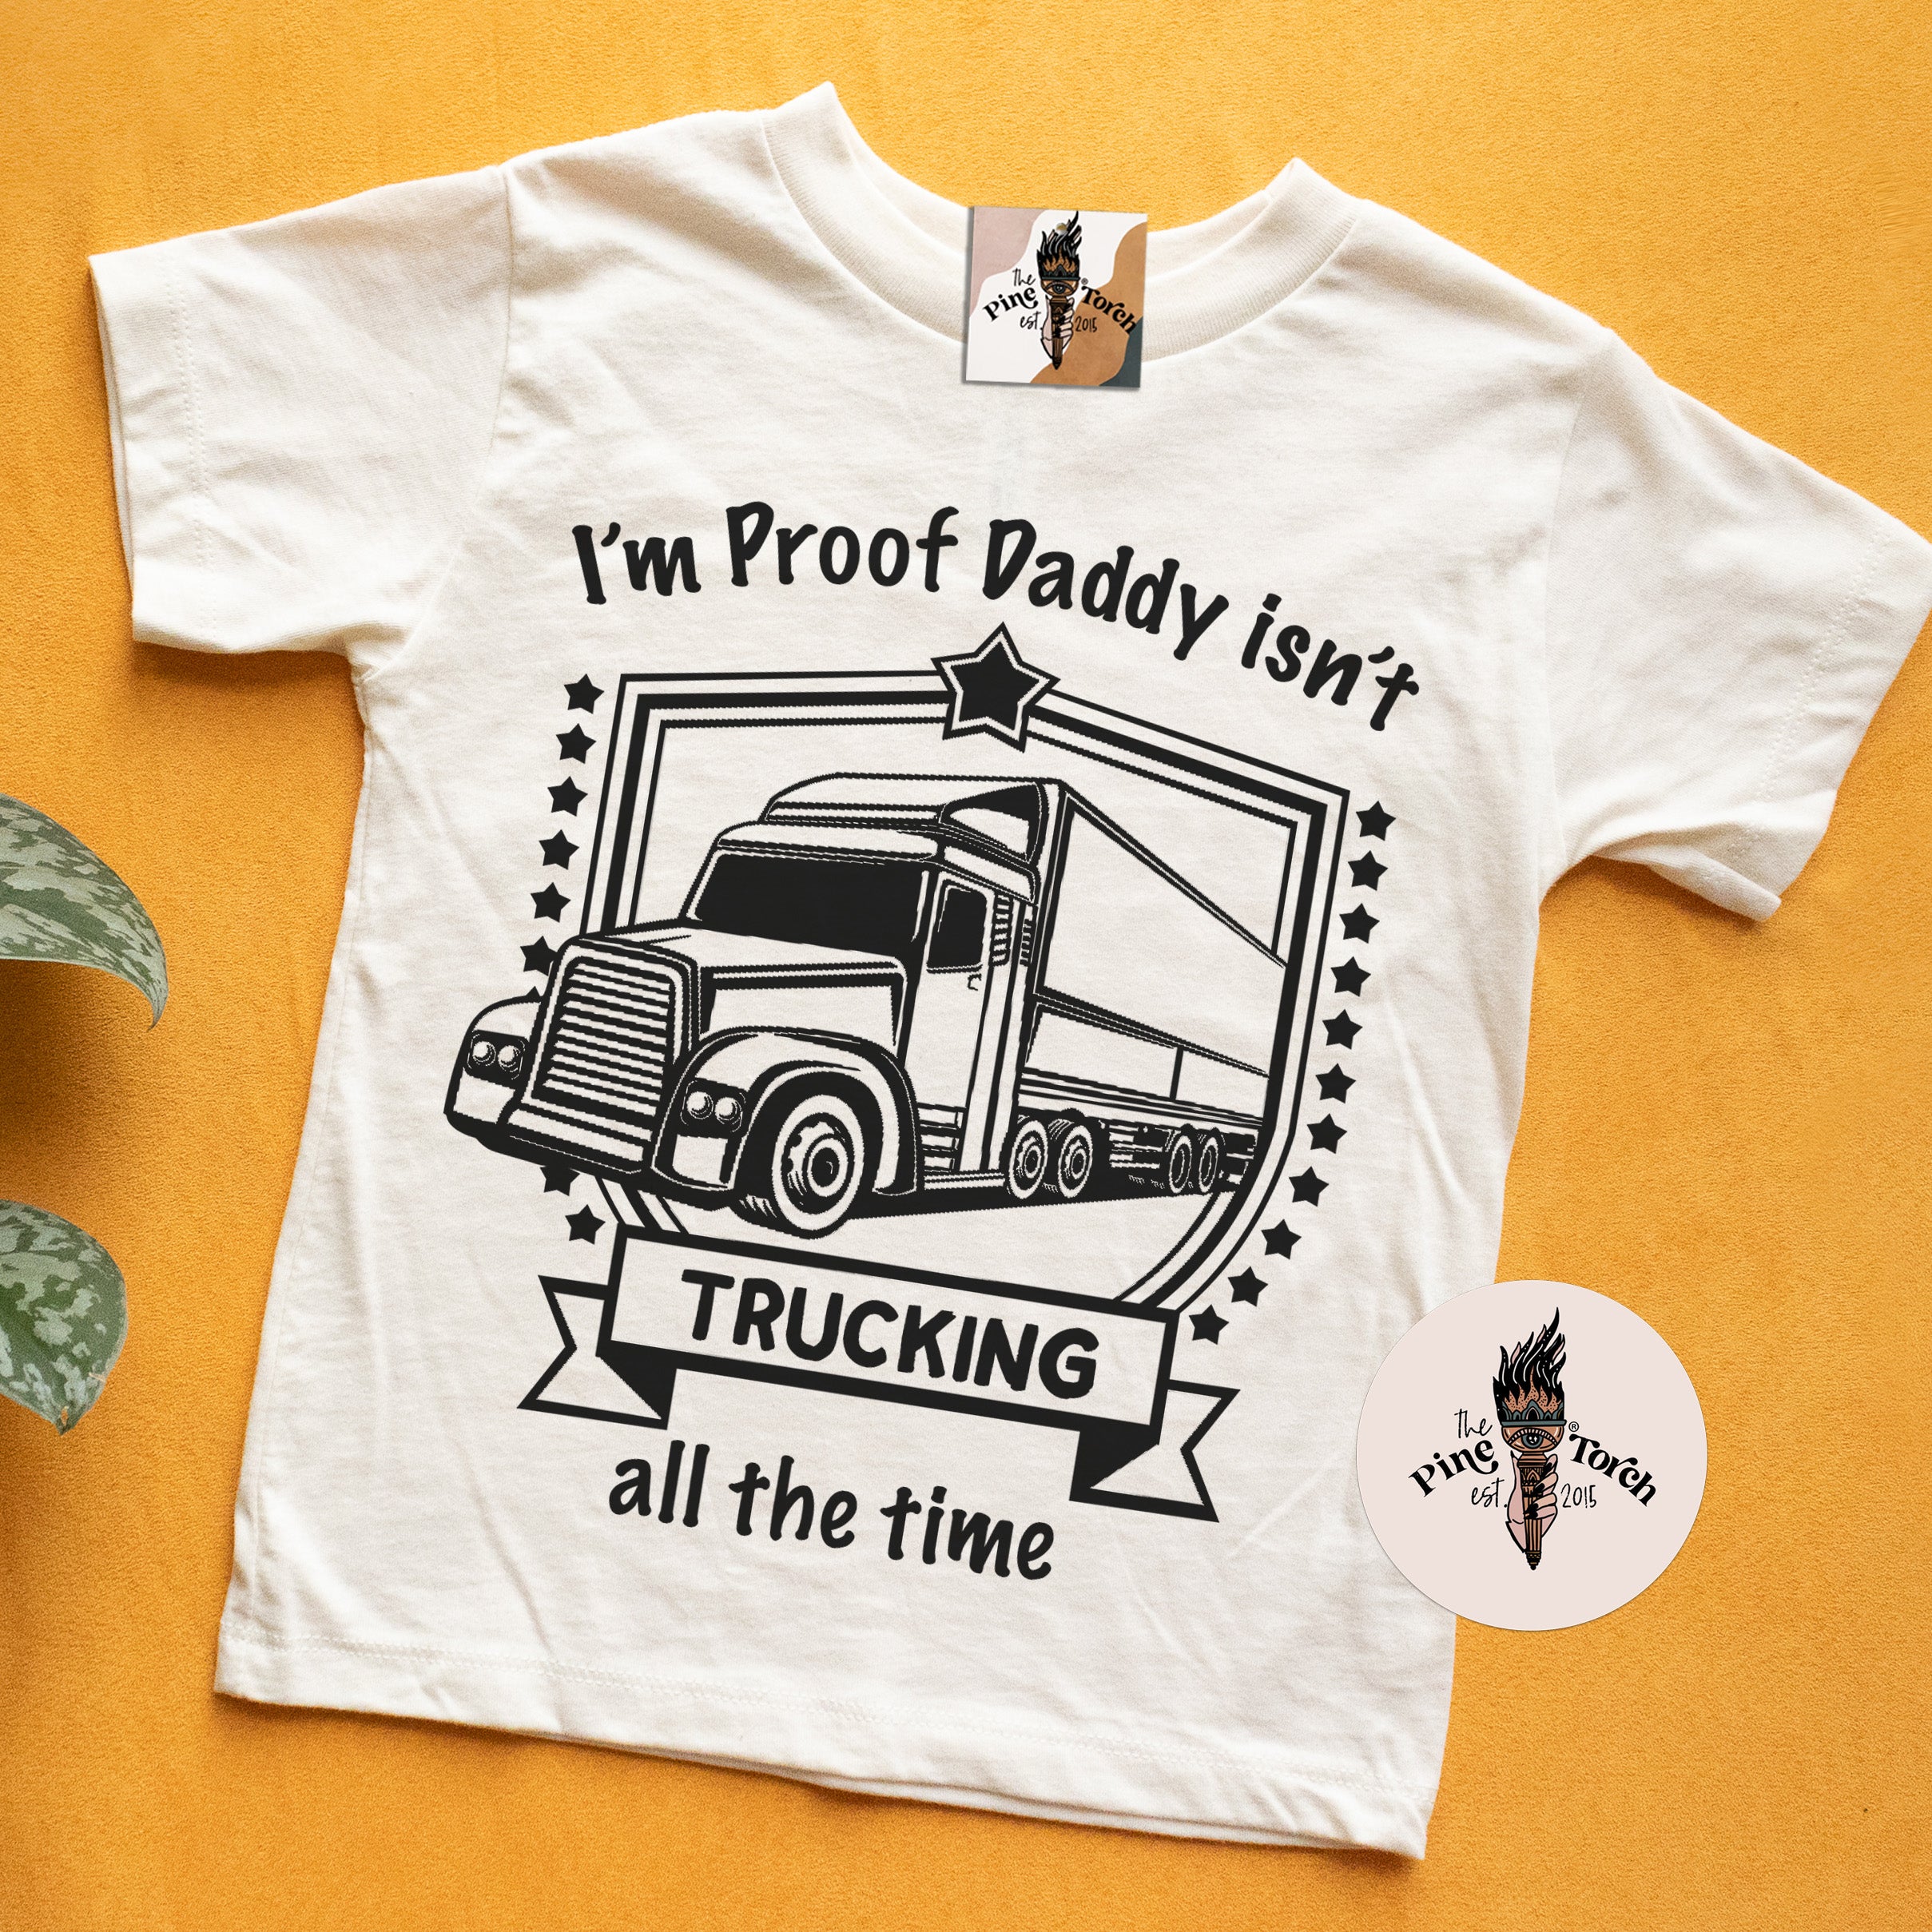 « I'M PROOF DADDY ISN'T TRUCKING ALL THE TIME » KID'S TEE